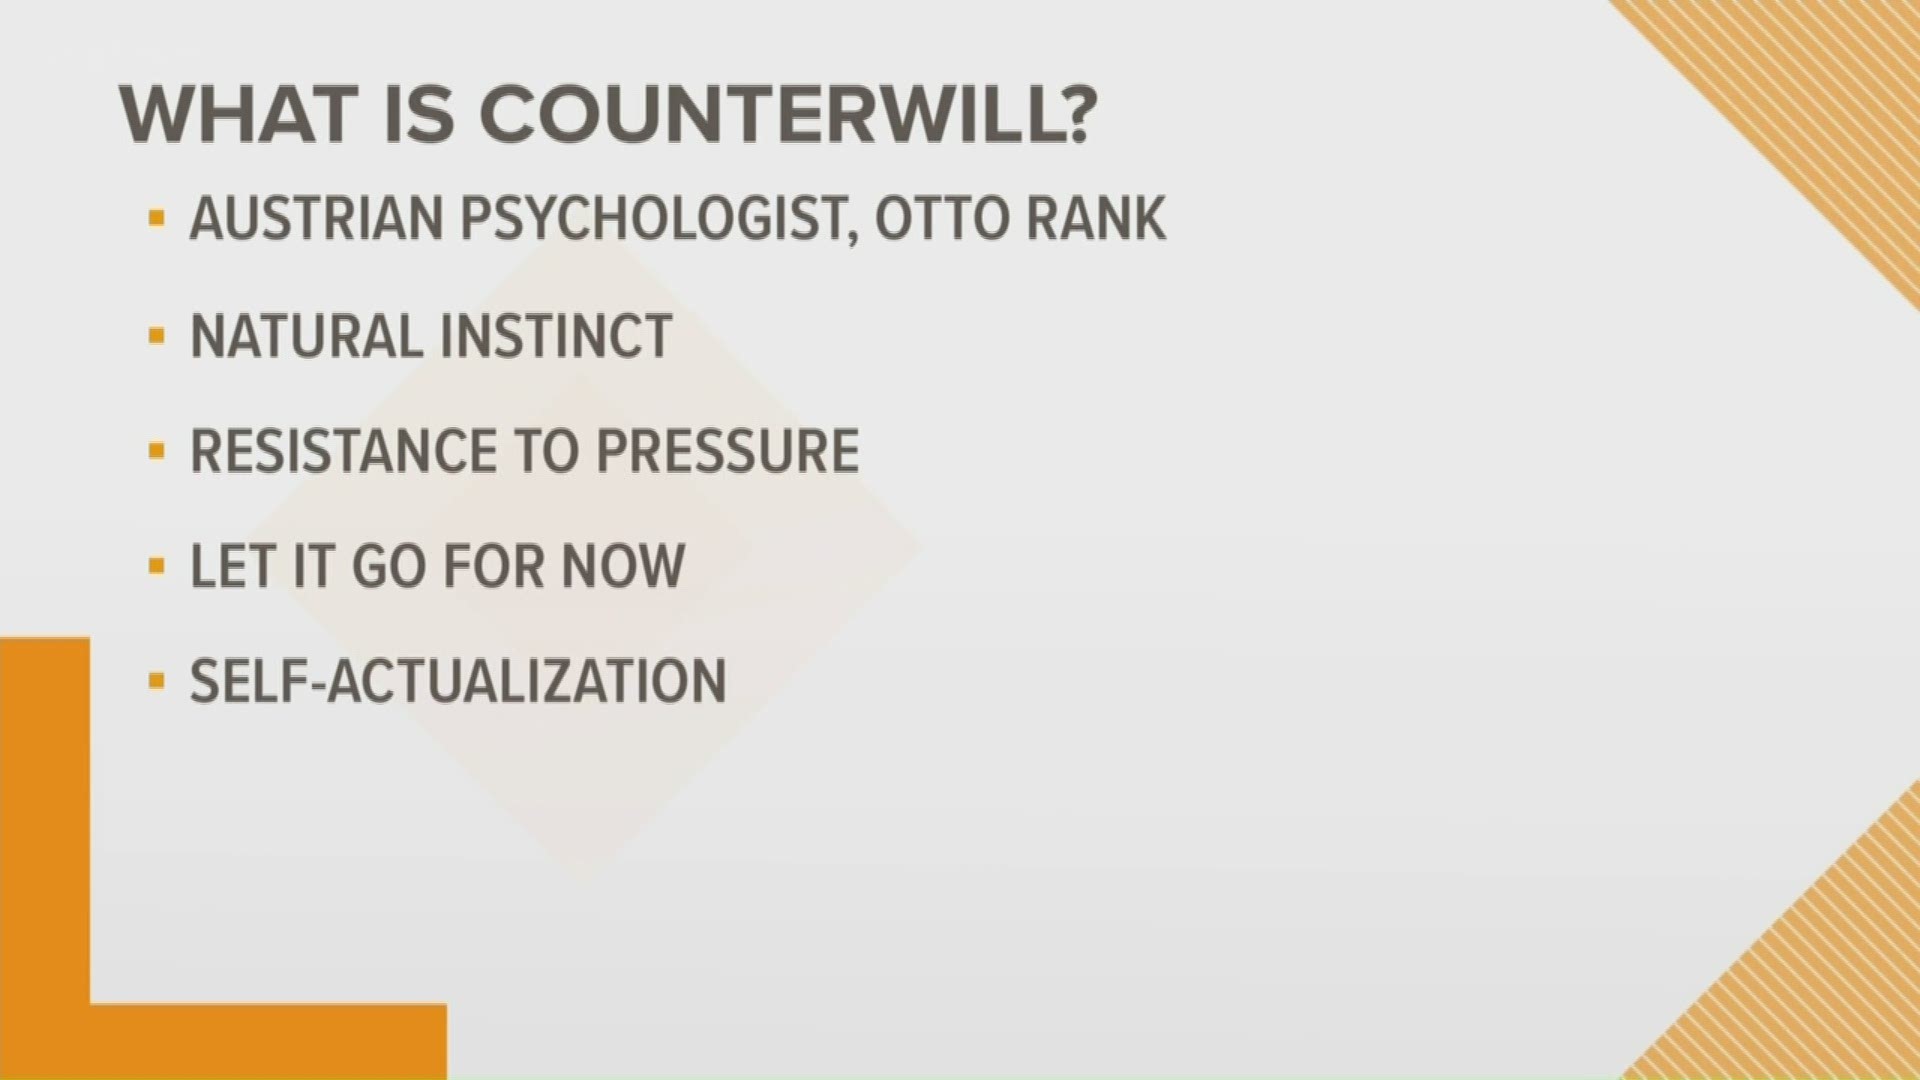 Parenting Coach Beaven Walters explains what "counterwill" is and how to deal with it in adolescents.